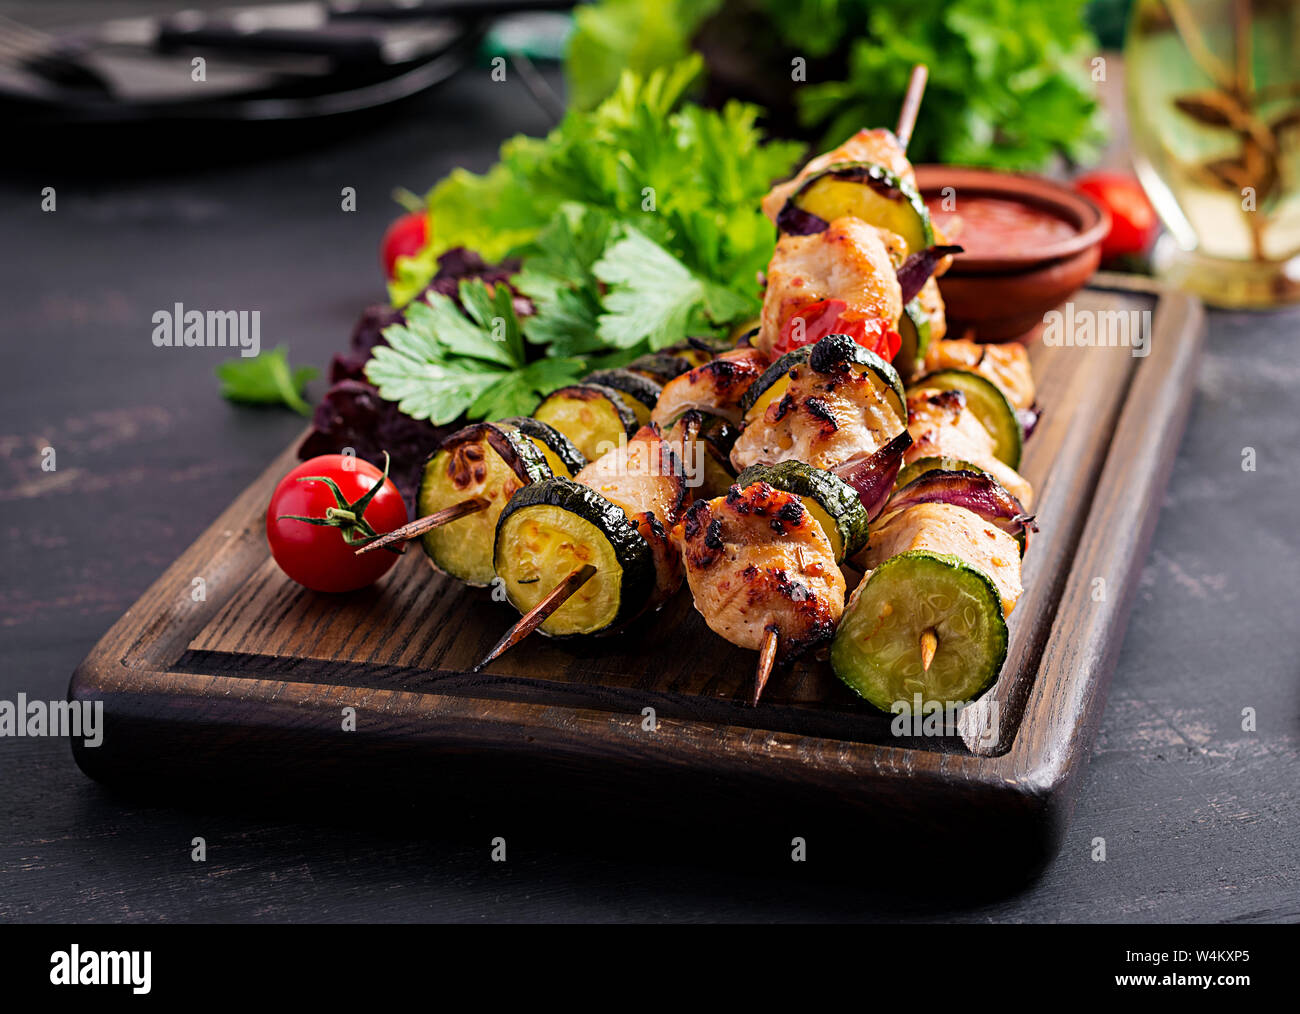 Grilled meat skewers, chicken  shish kebab with zucchini, tomatoes and red onions. Barbecue food. Stock Photo